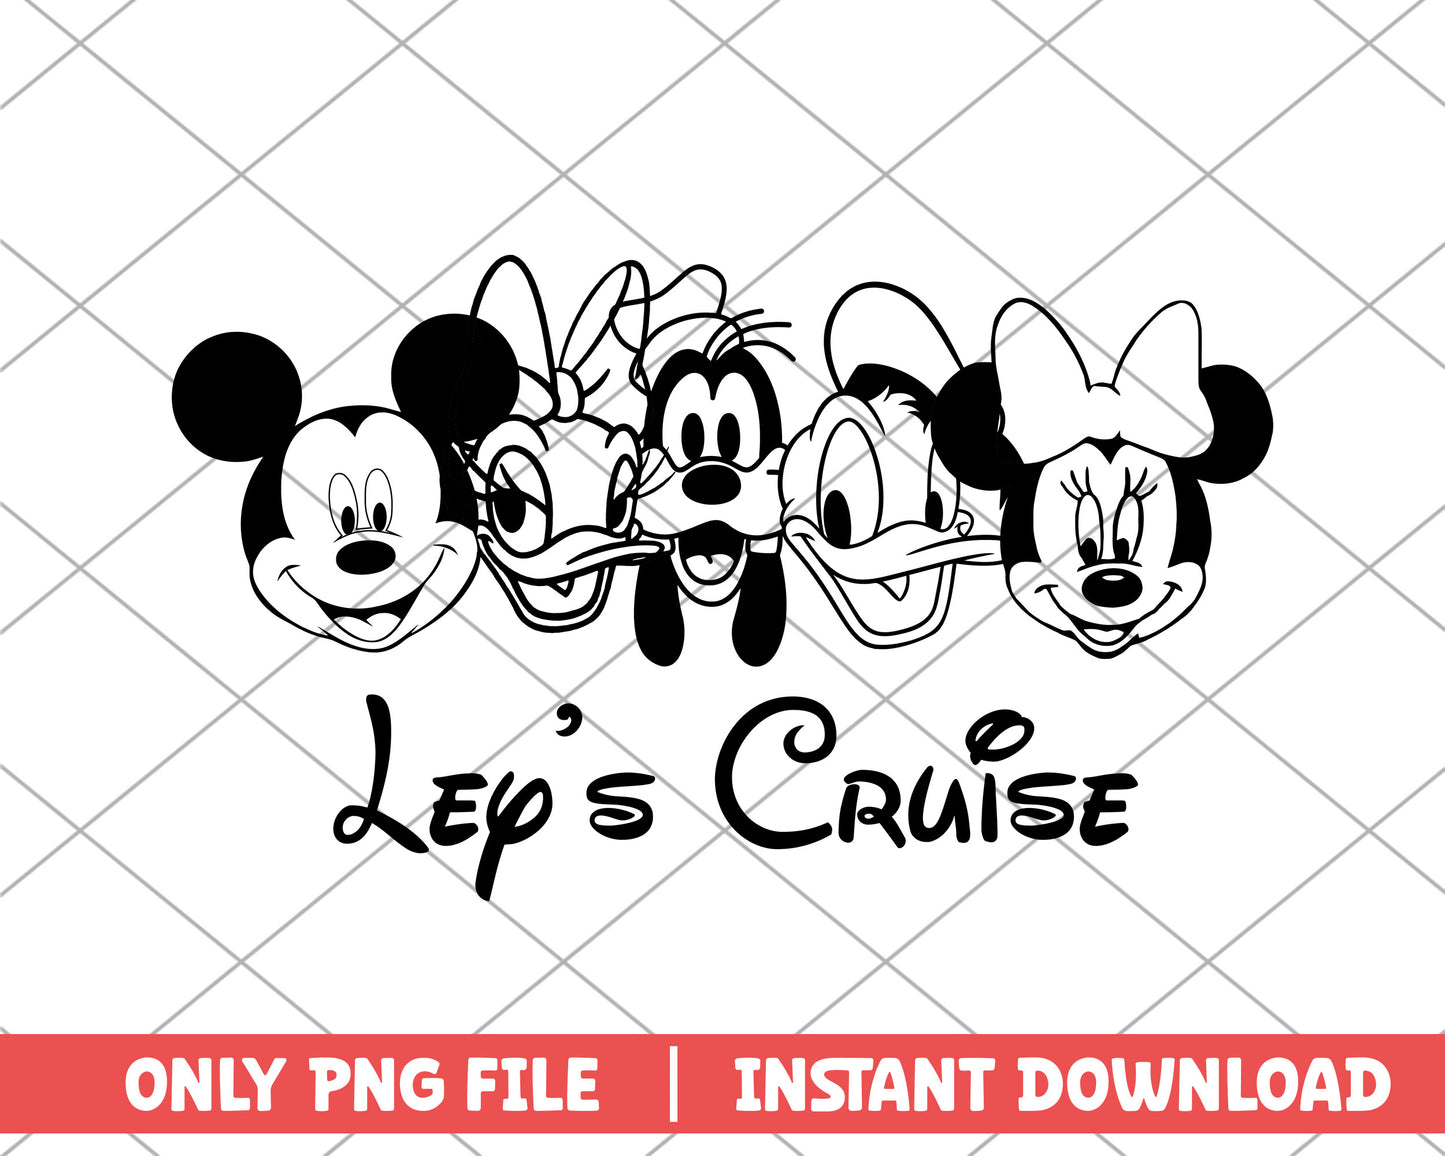 Let's cruise disney png